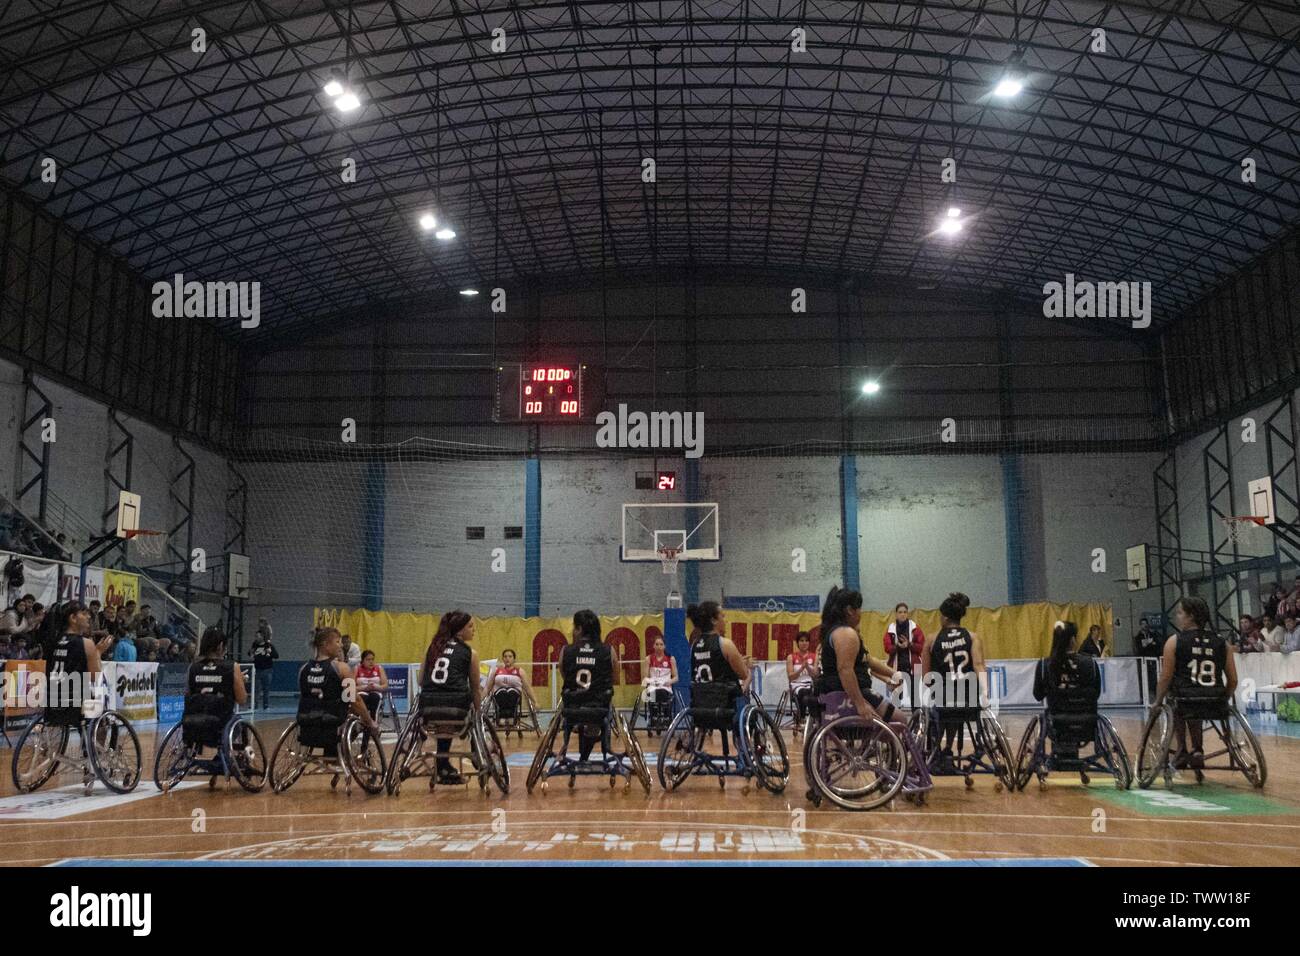 Firmat, Santa Fe, Argentina. 22nd June, 2019. The national female wheelchairb basketball teams of Argentina and Chile perform a friendly match ahead of Lima 2019 Parapan American Games. The match was a raisefunder event, since at present financial aid was cut off and the players have to assume the costs to participate in the tournament. Credit: Patricio Murphy/ZUMA Wire/Alamy Live News Stock Photo